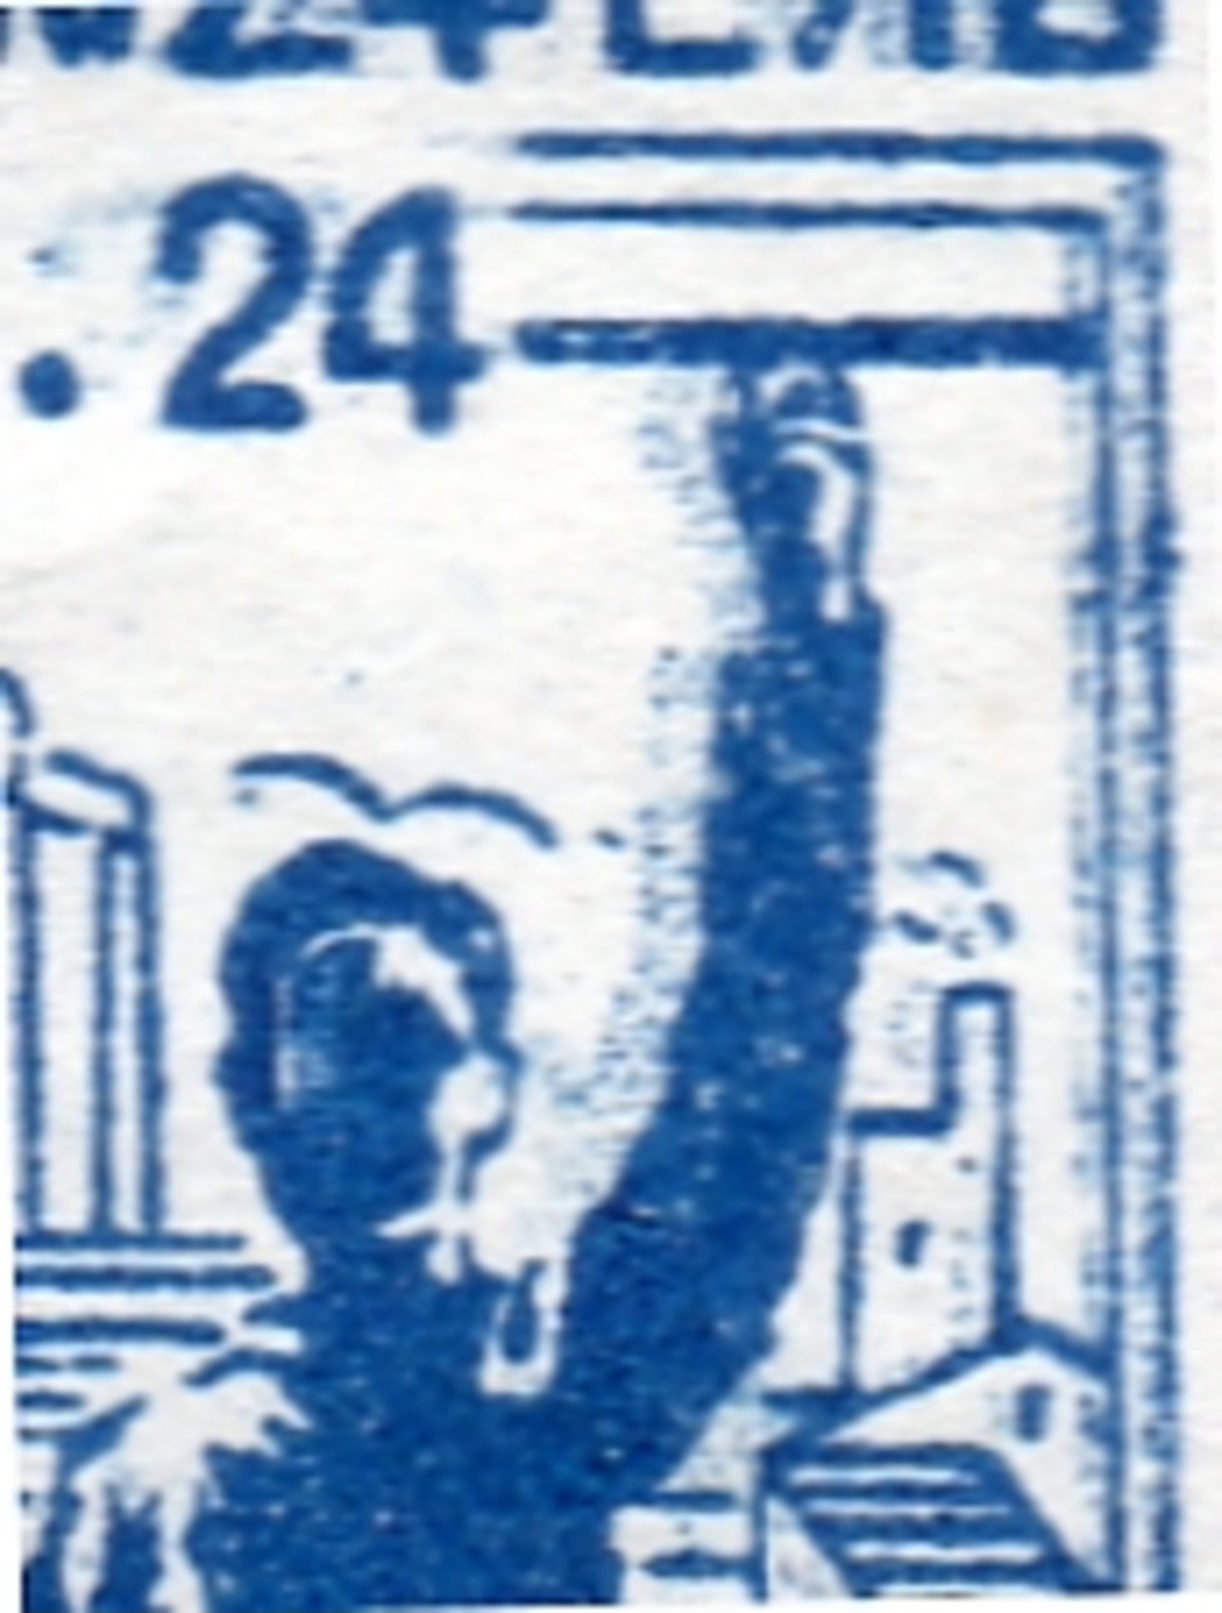 1948 Right Stamp: Slight Double Print Of The Arm VF Used (k43) - Korea (Noord)